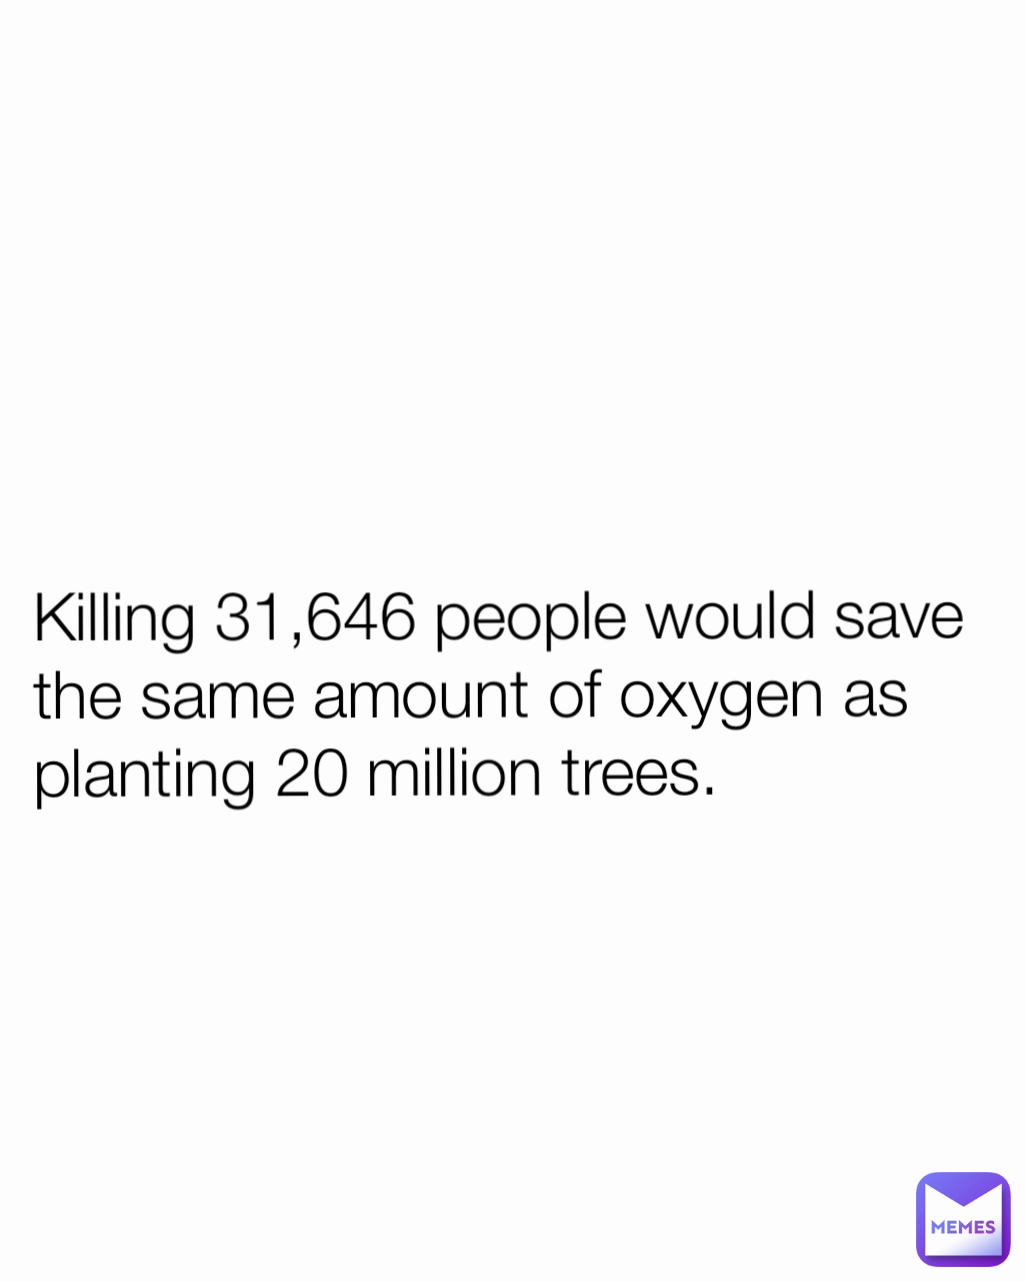 Killing 31,646 people would save the same amount of oxygen as planting 20 million trees.
